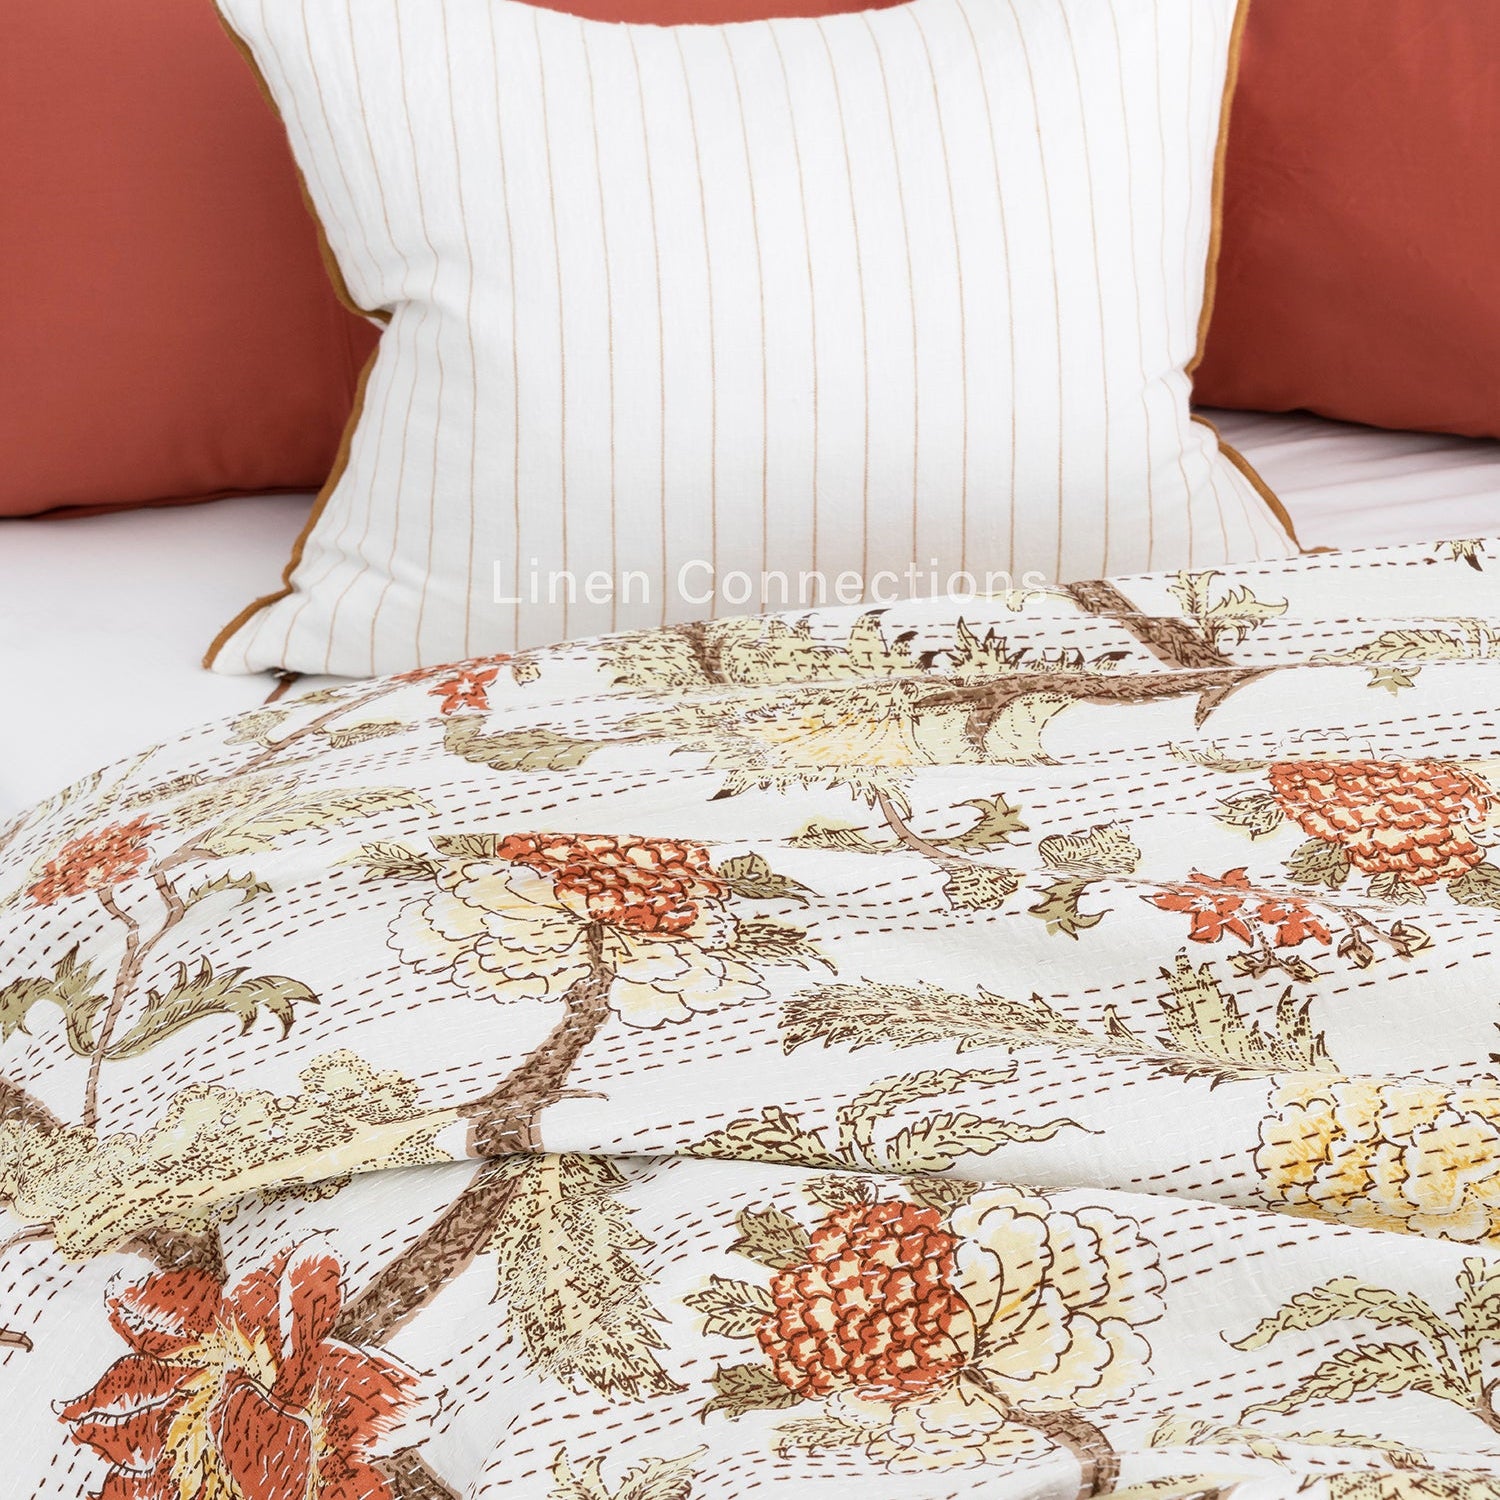 Linen Connections Indian Kantha Quilt - Spiritual Tree